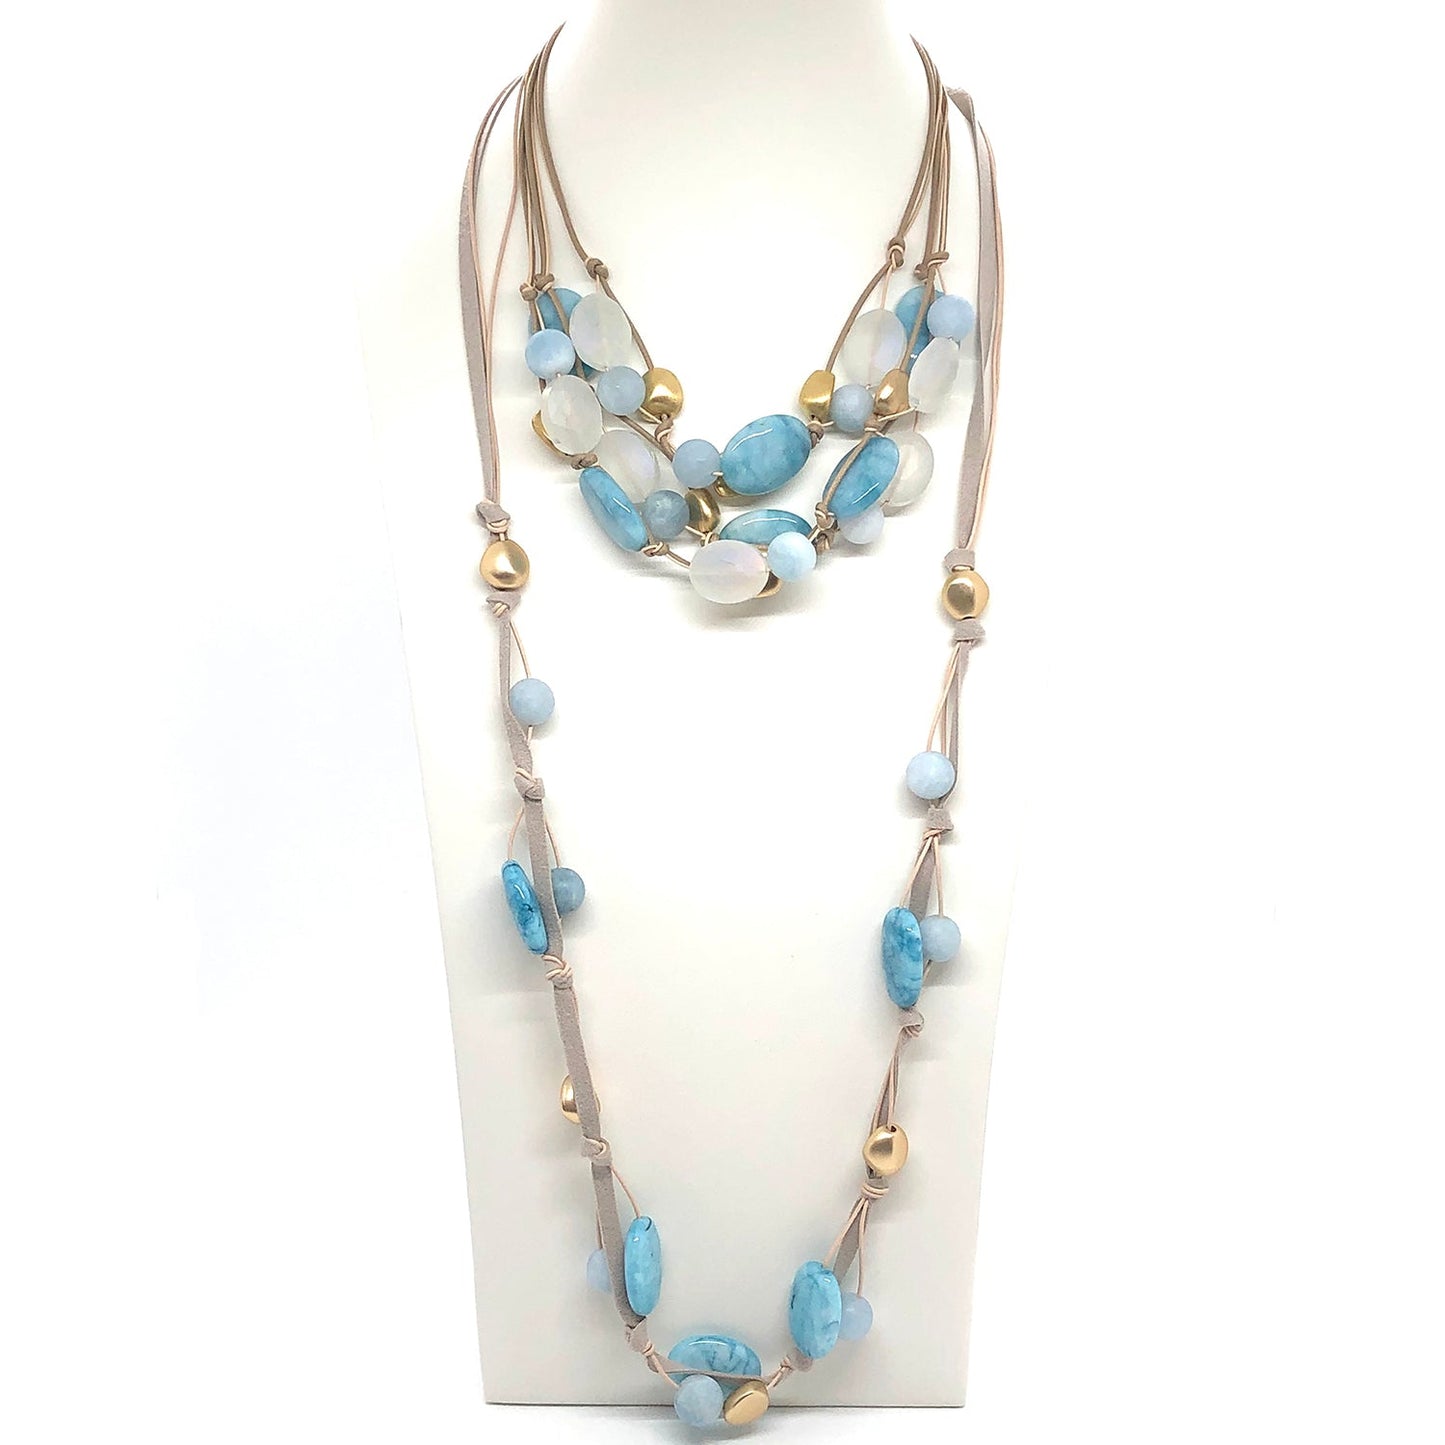 Blue Larimar With Matte Aquamarine With Matte White Oval Crystal And Matte Gold Beads Putty Leather And Natural Linen 3 Strand Torsade Style Necklace And Layer Necklace